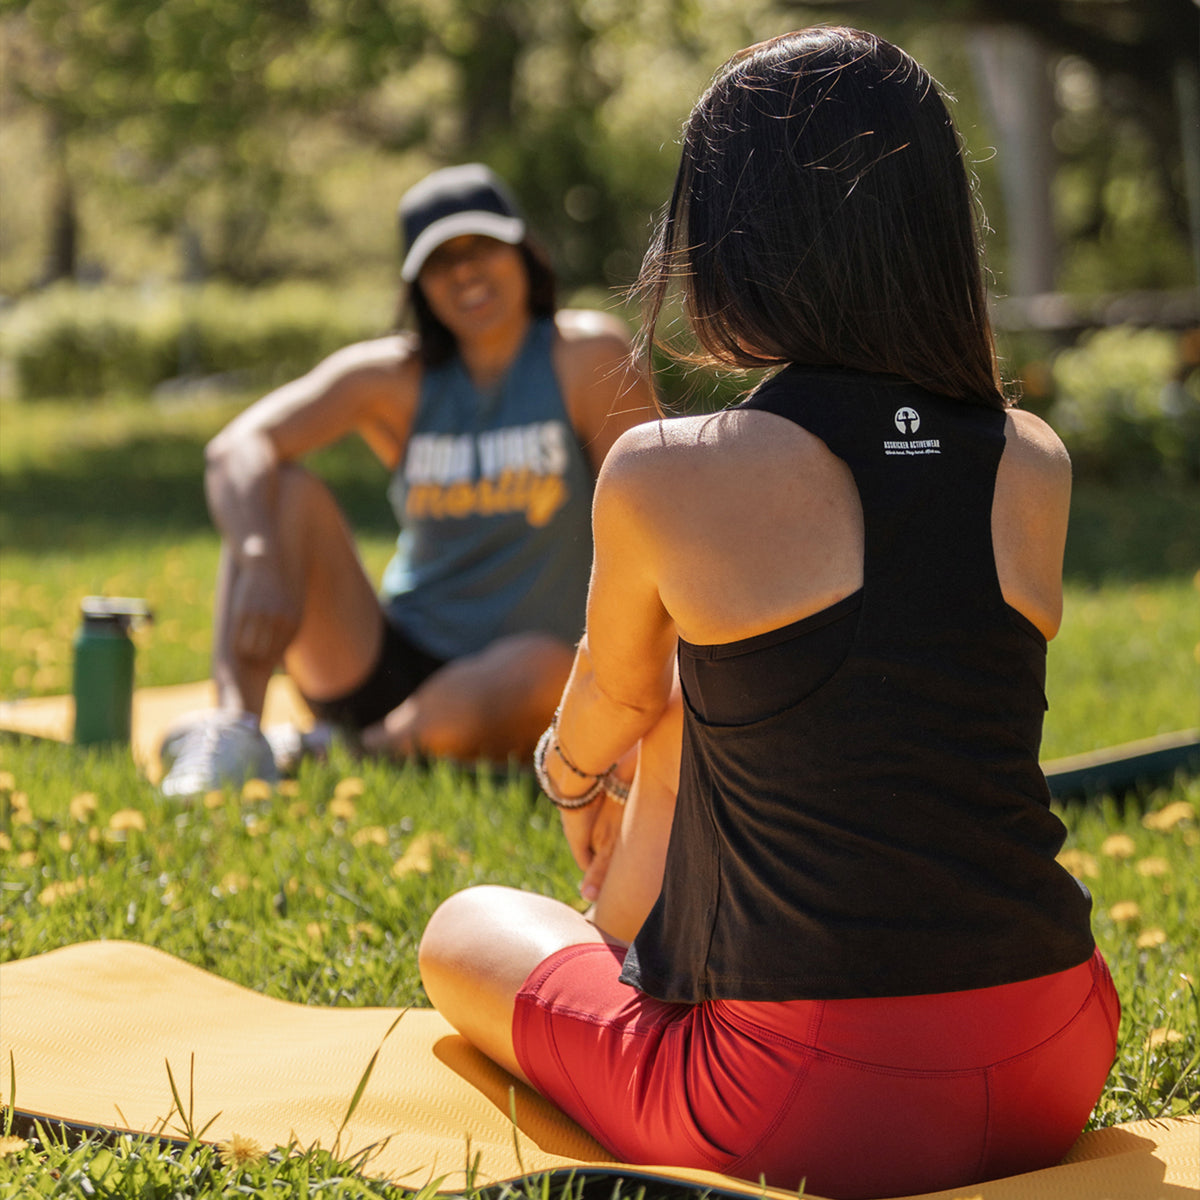 Do More Yoga, Give Less F*ck's  Funny Tank Tops for Women - Asskicker  Activewear